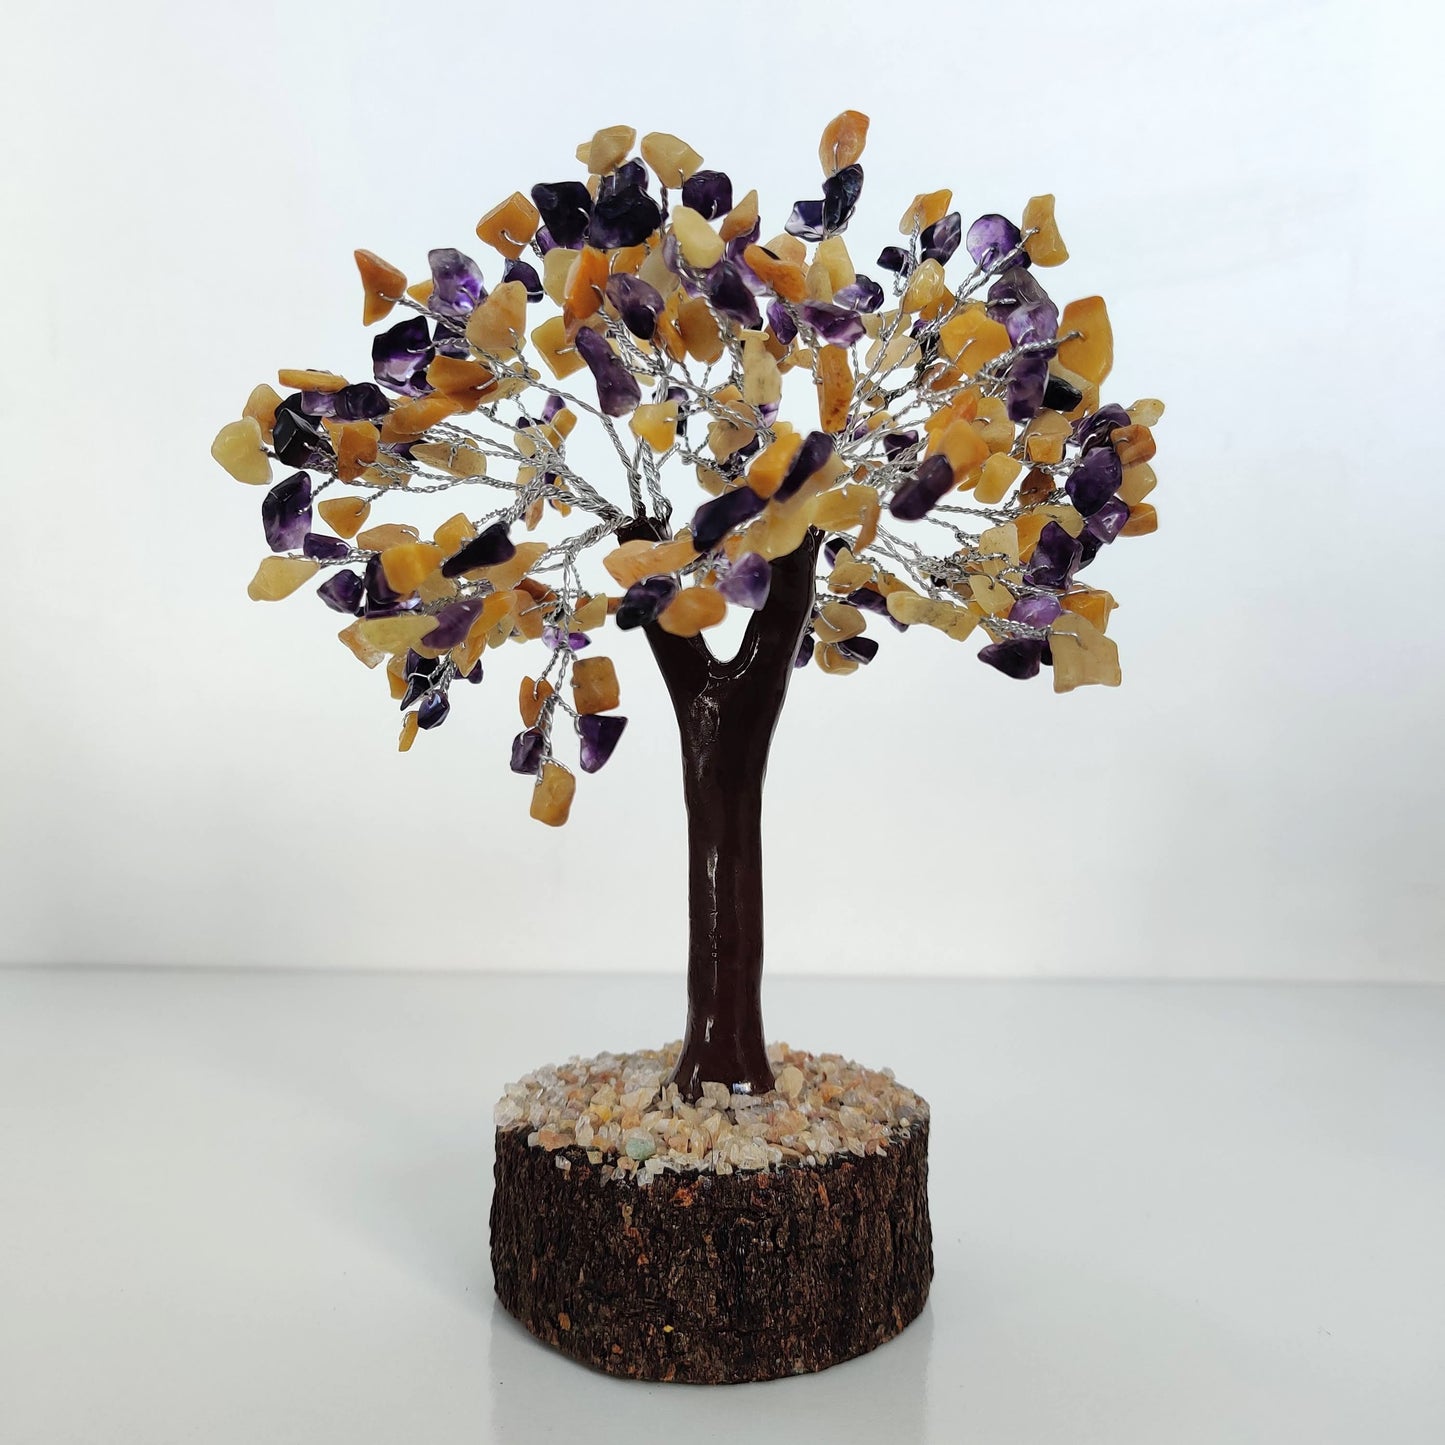 Amethyst and Yellow Quartz Crystal Tree on Wooden Base - Rivendell Shop